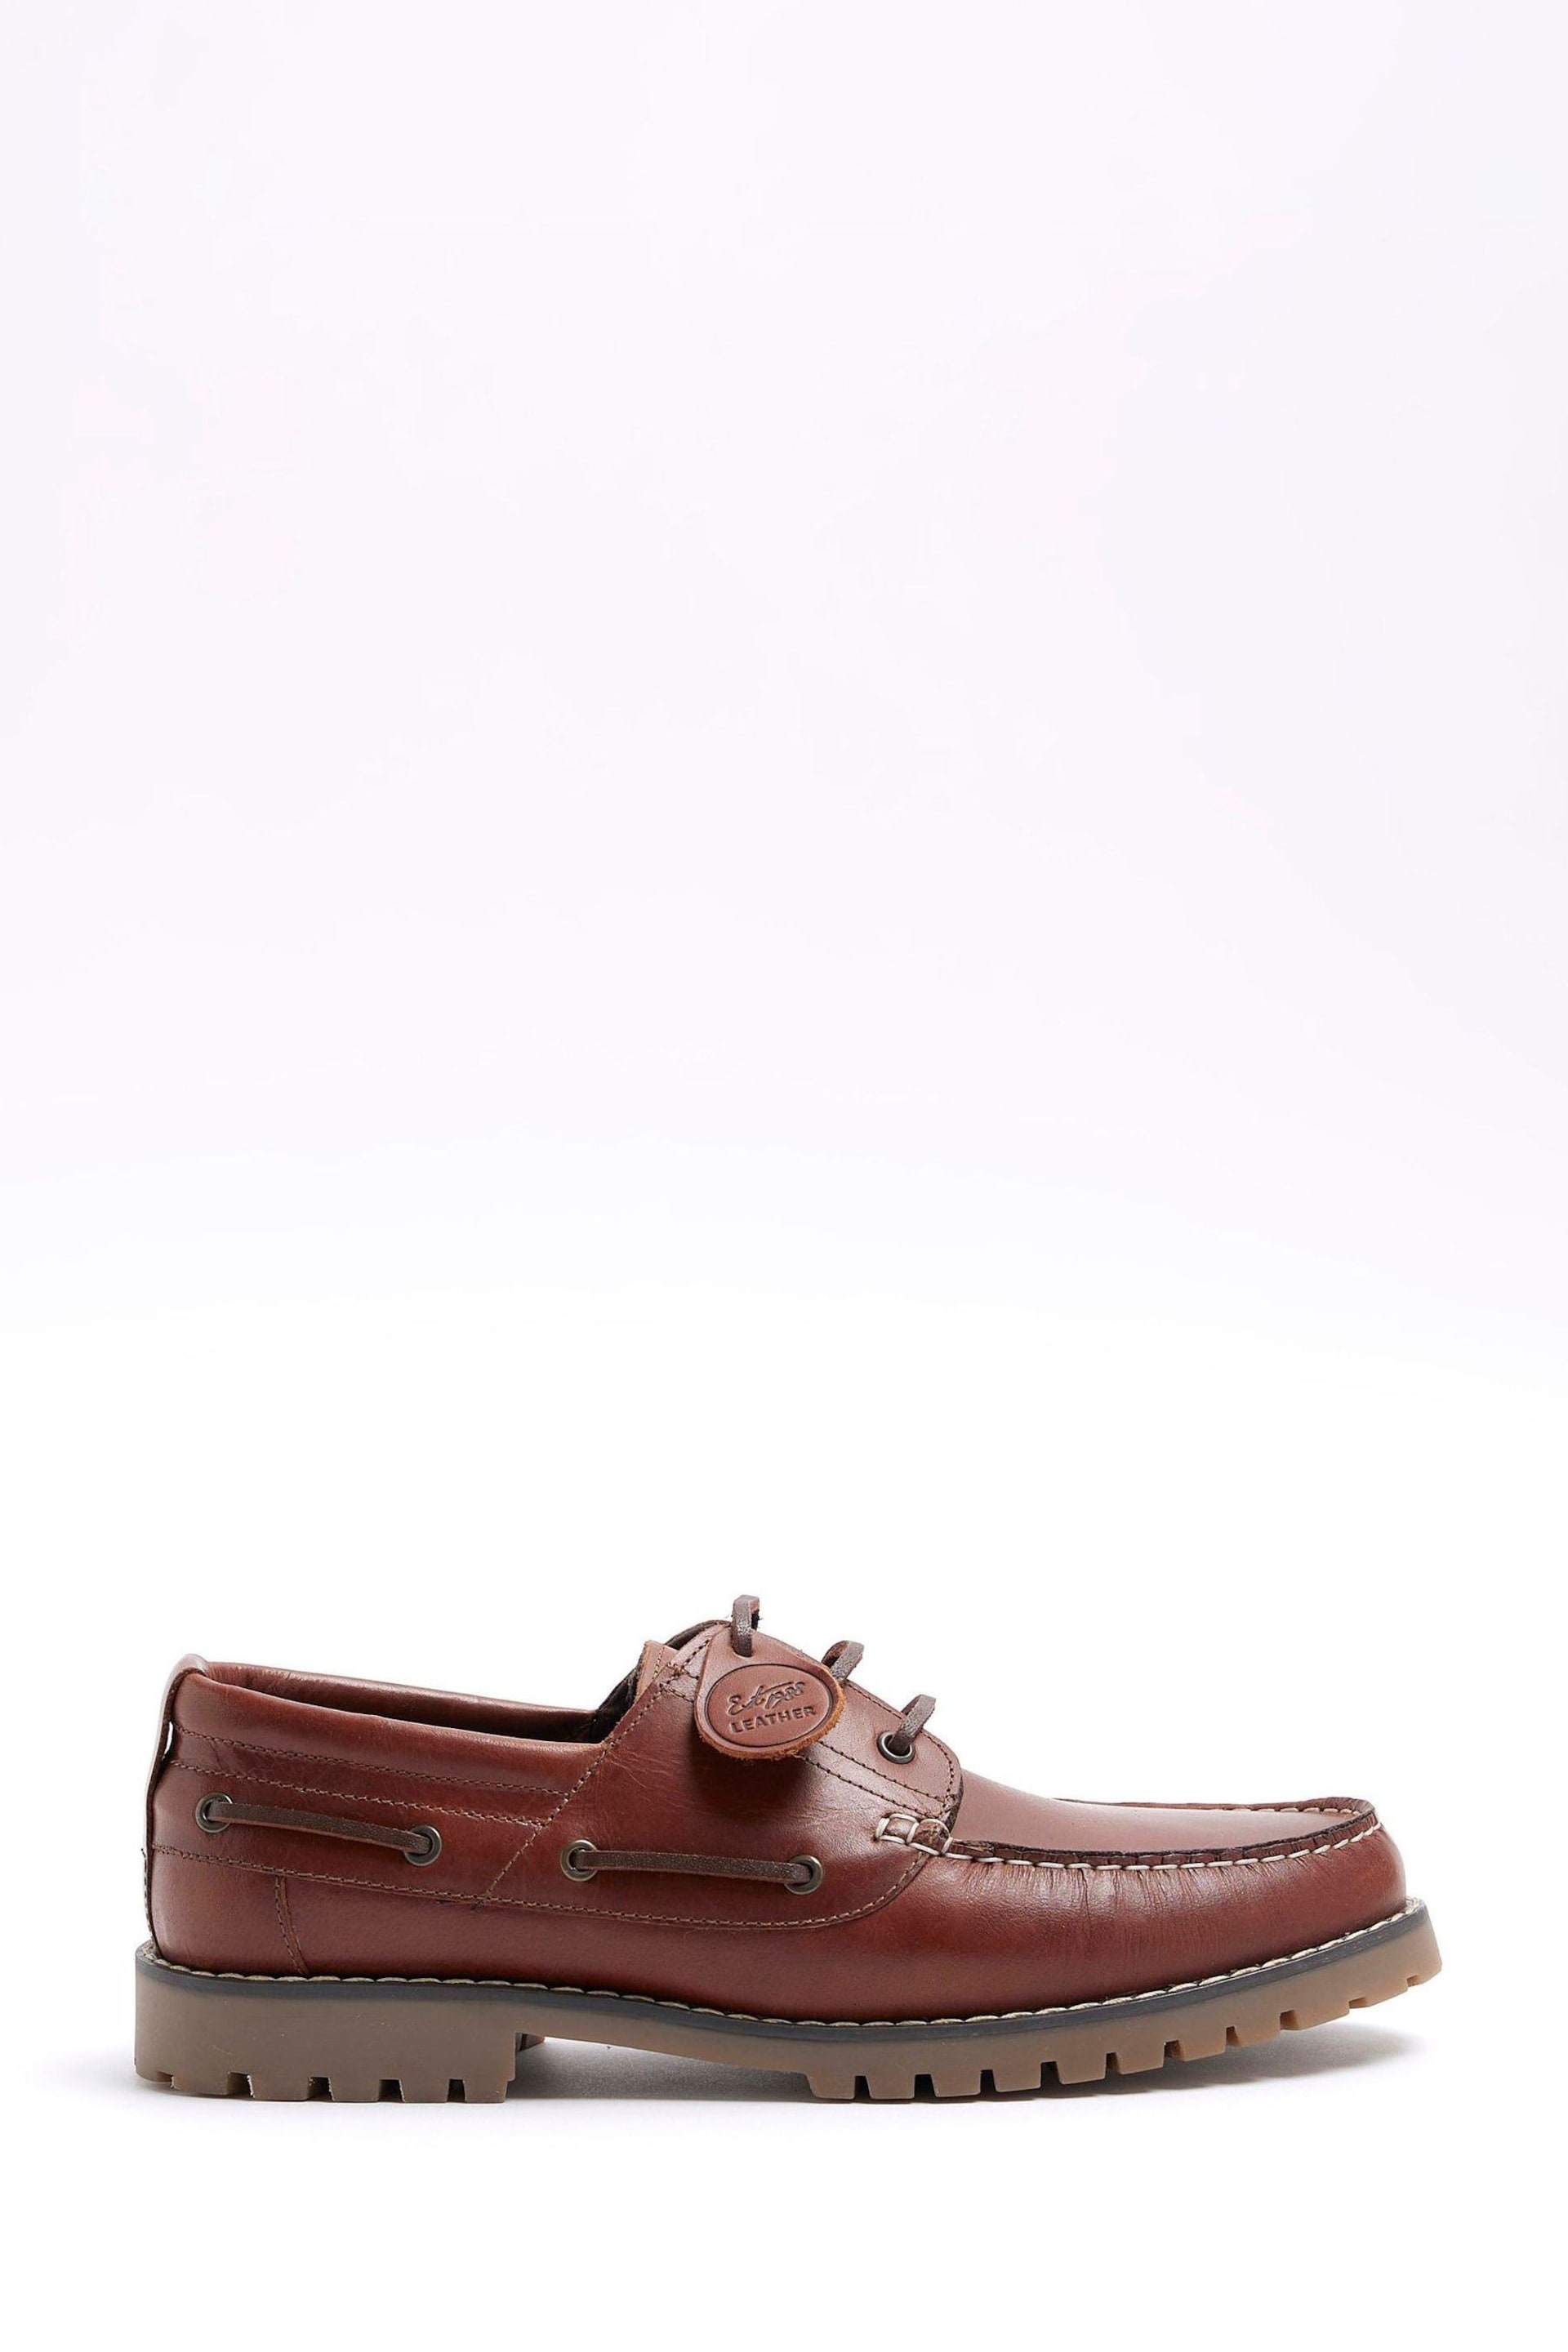 River Island Brown Leather Boat Shoes - Image 1 of 4